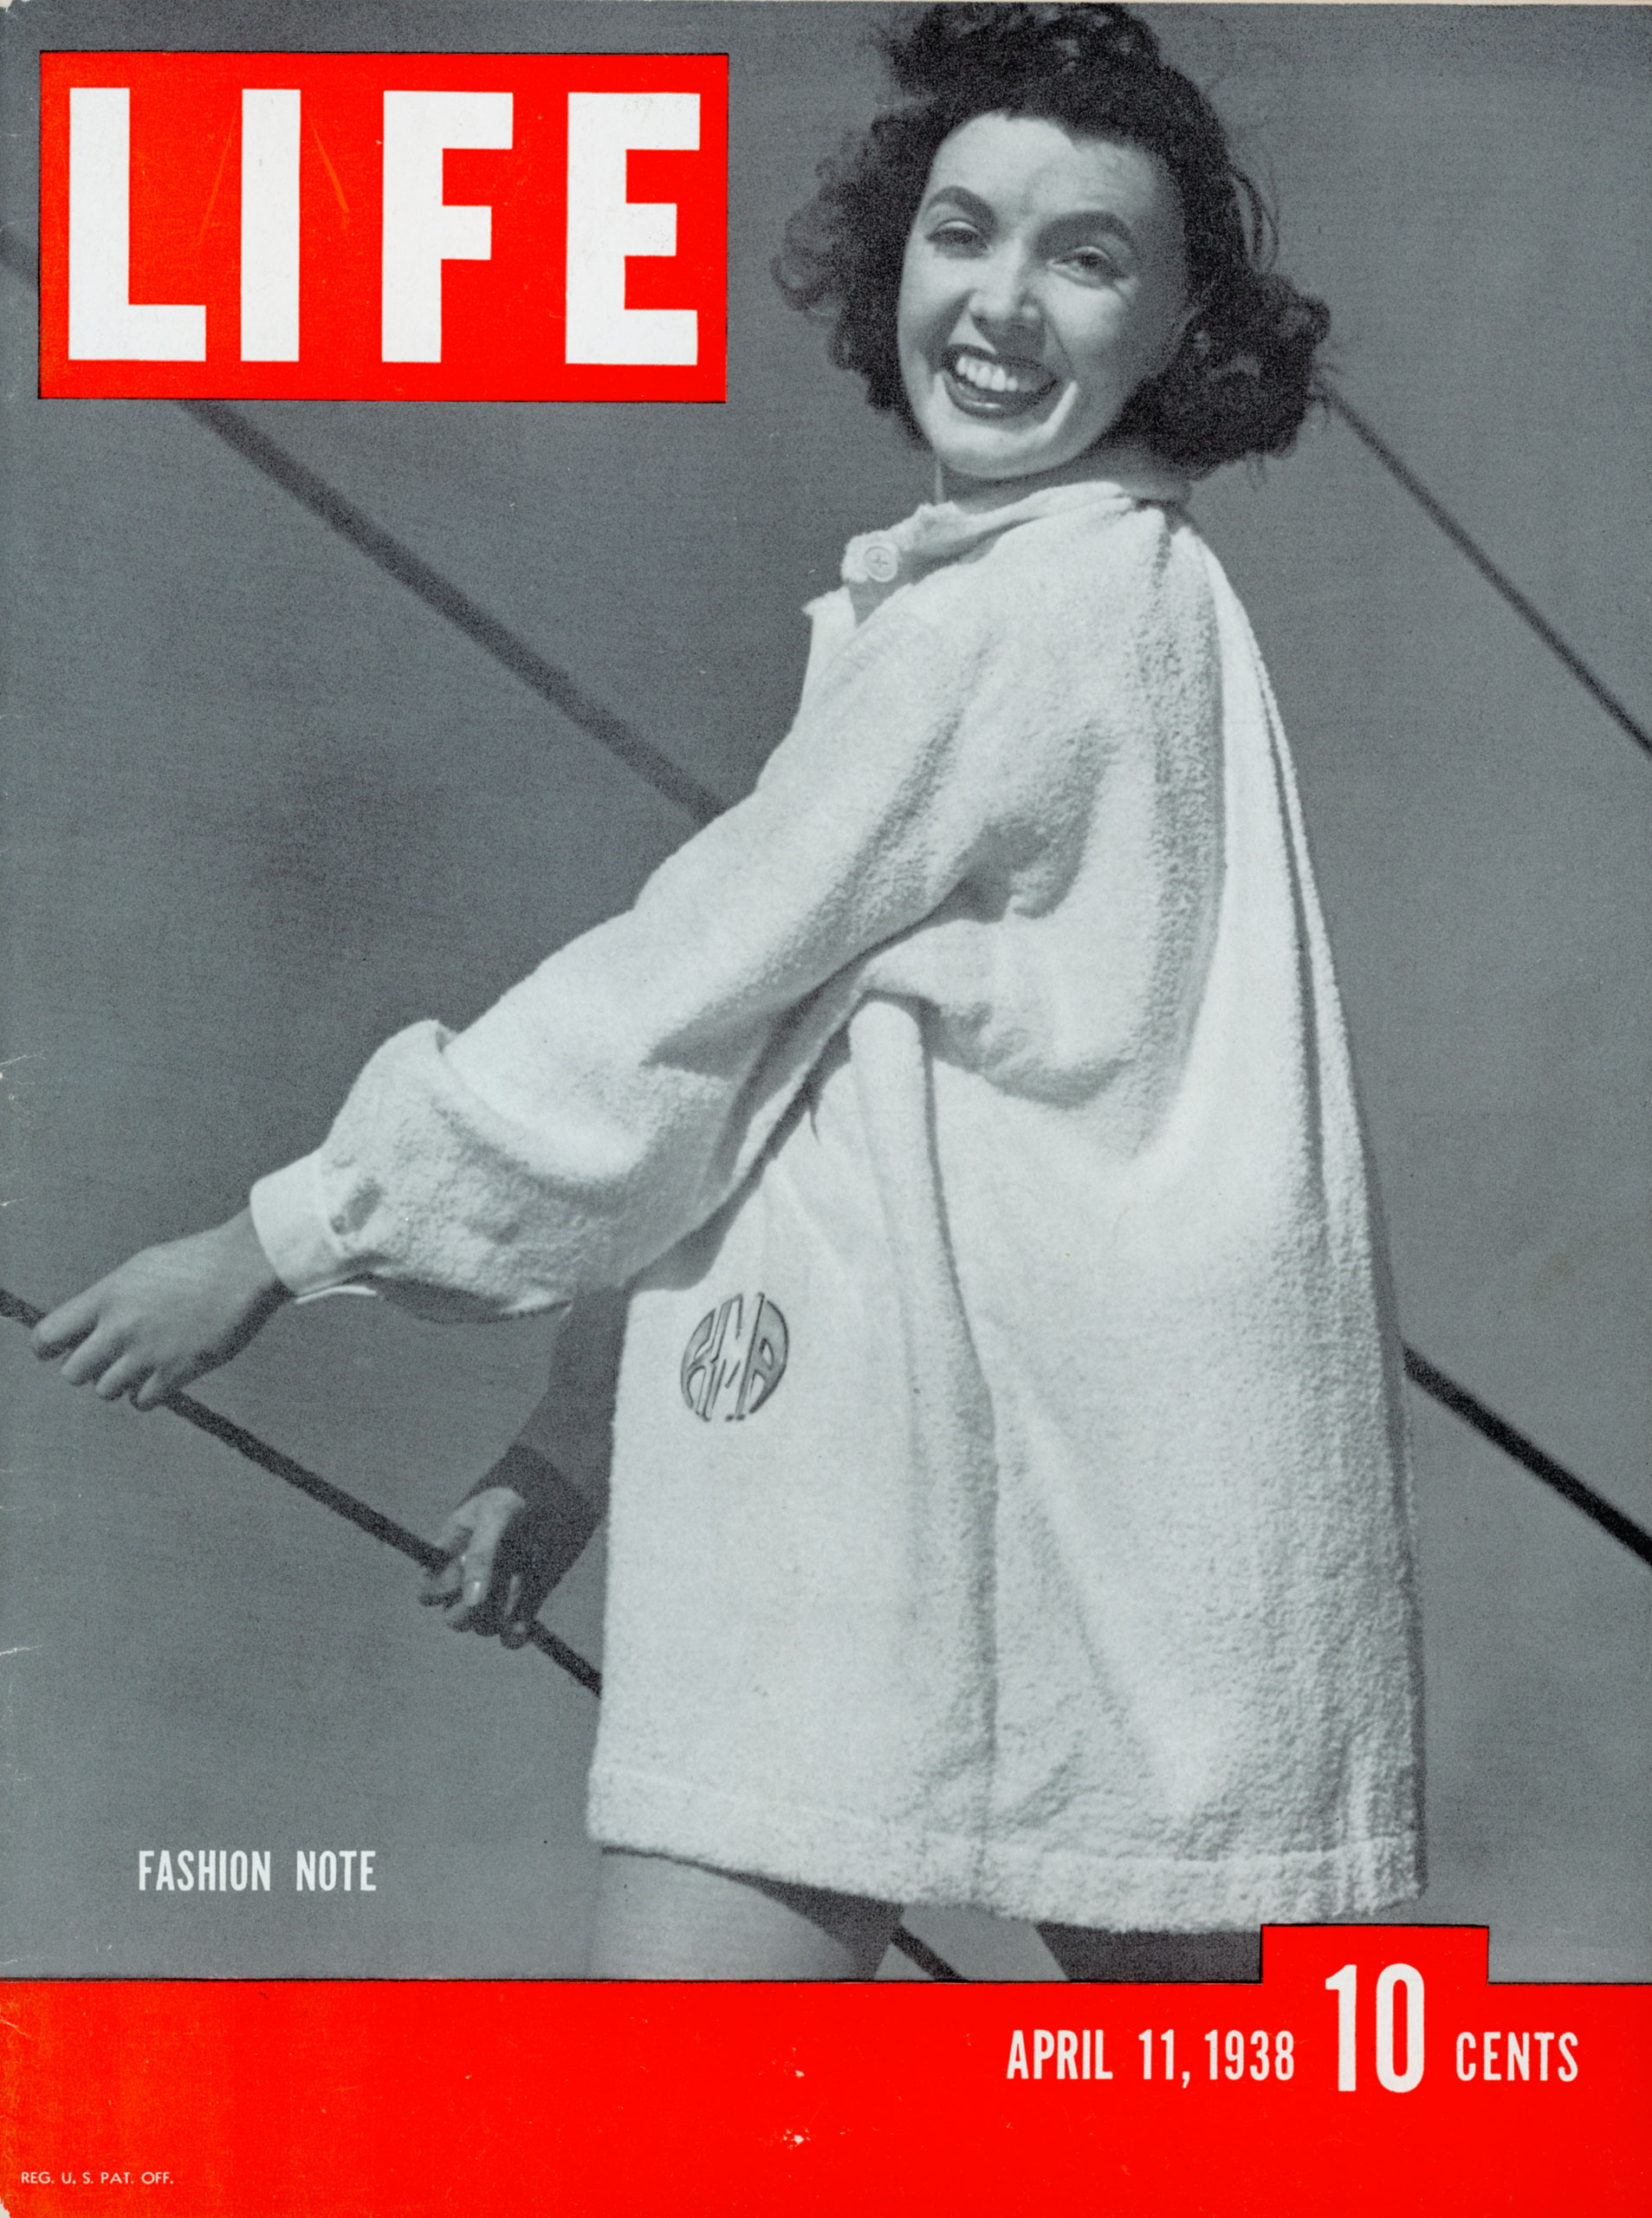 April 11, 1938 cover of LIFE magazine.